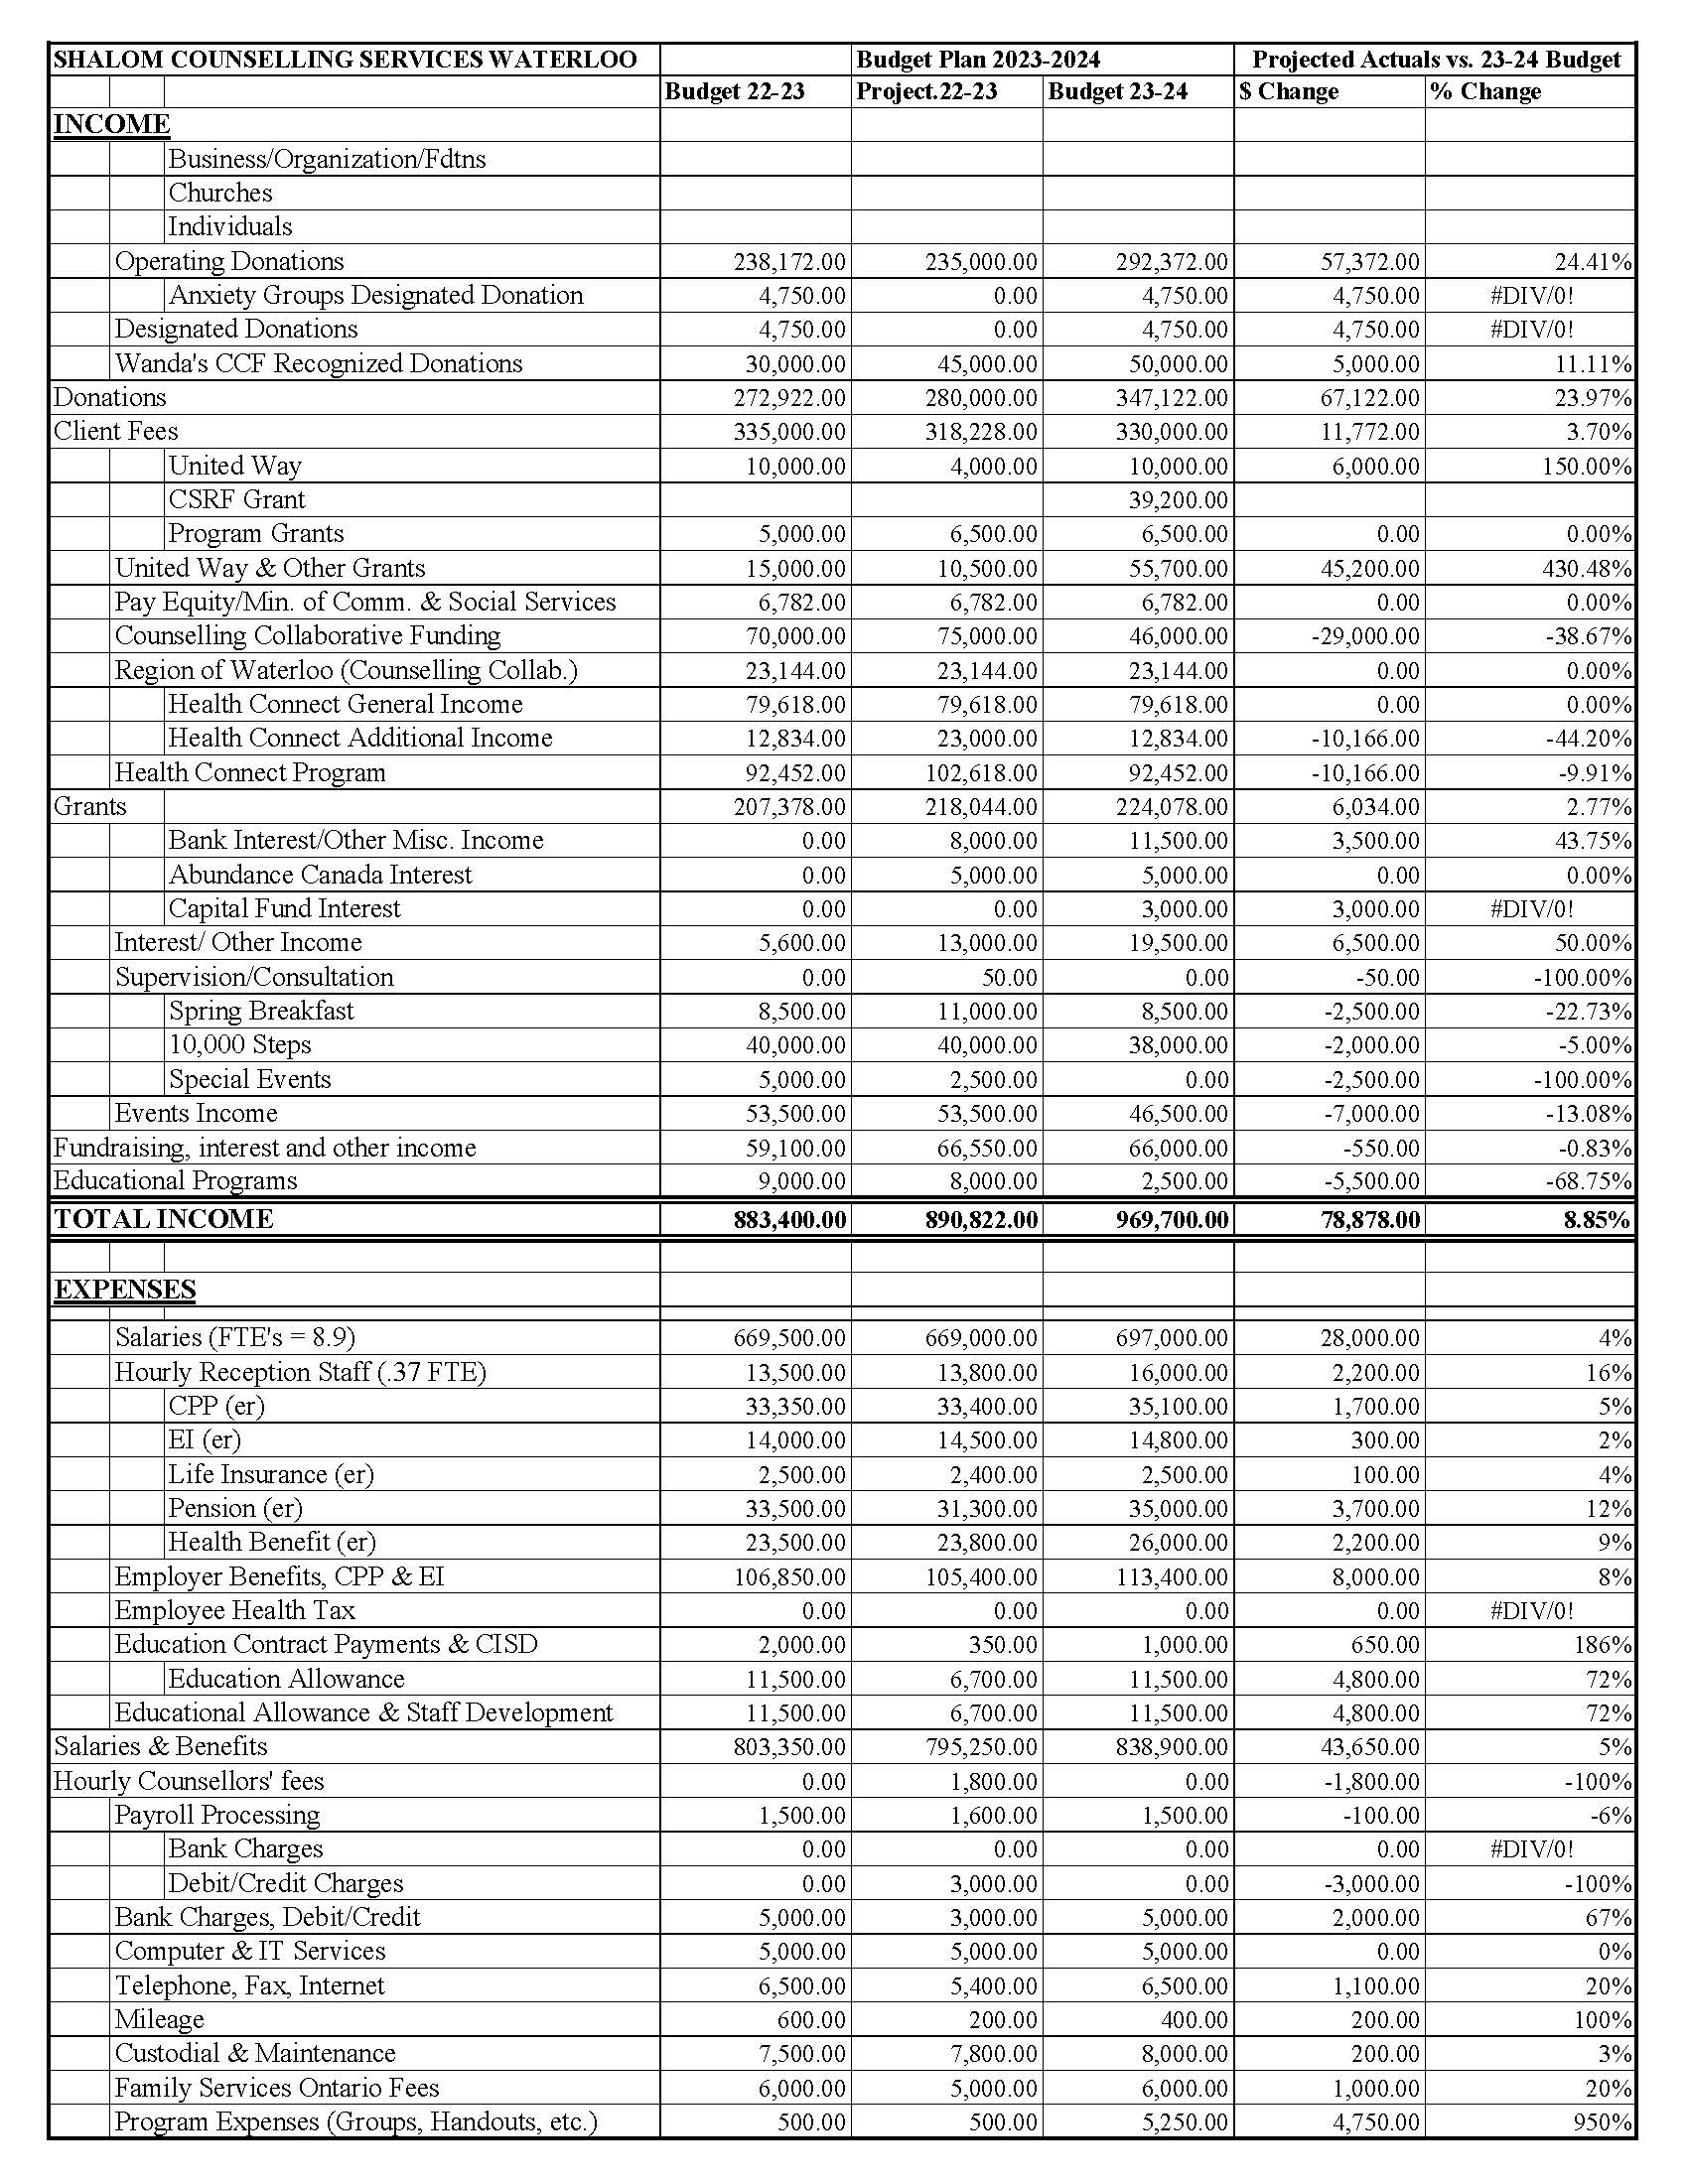 2023/2024 Operating Budget First Page